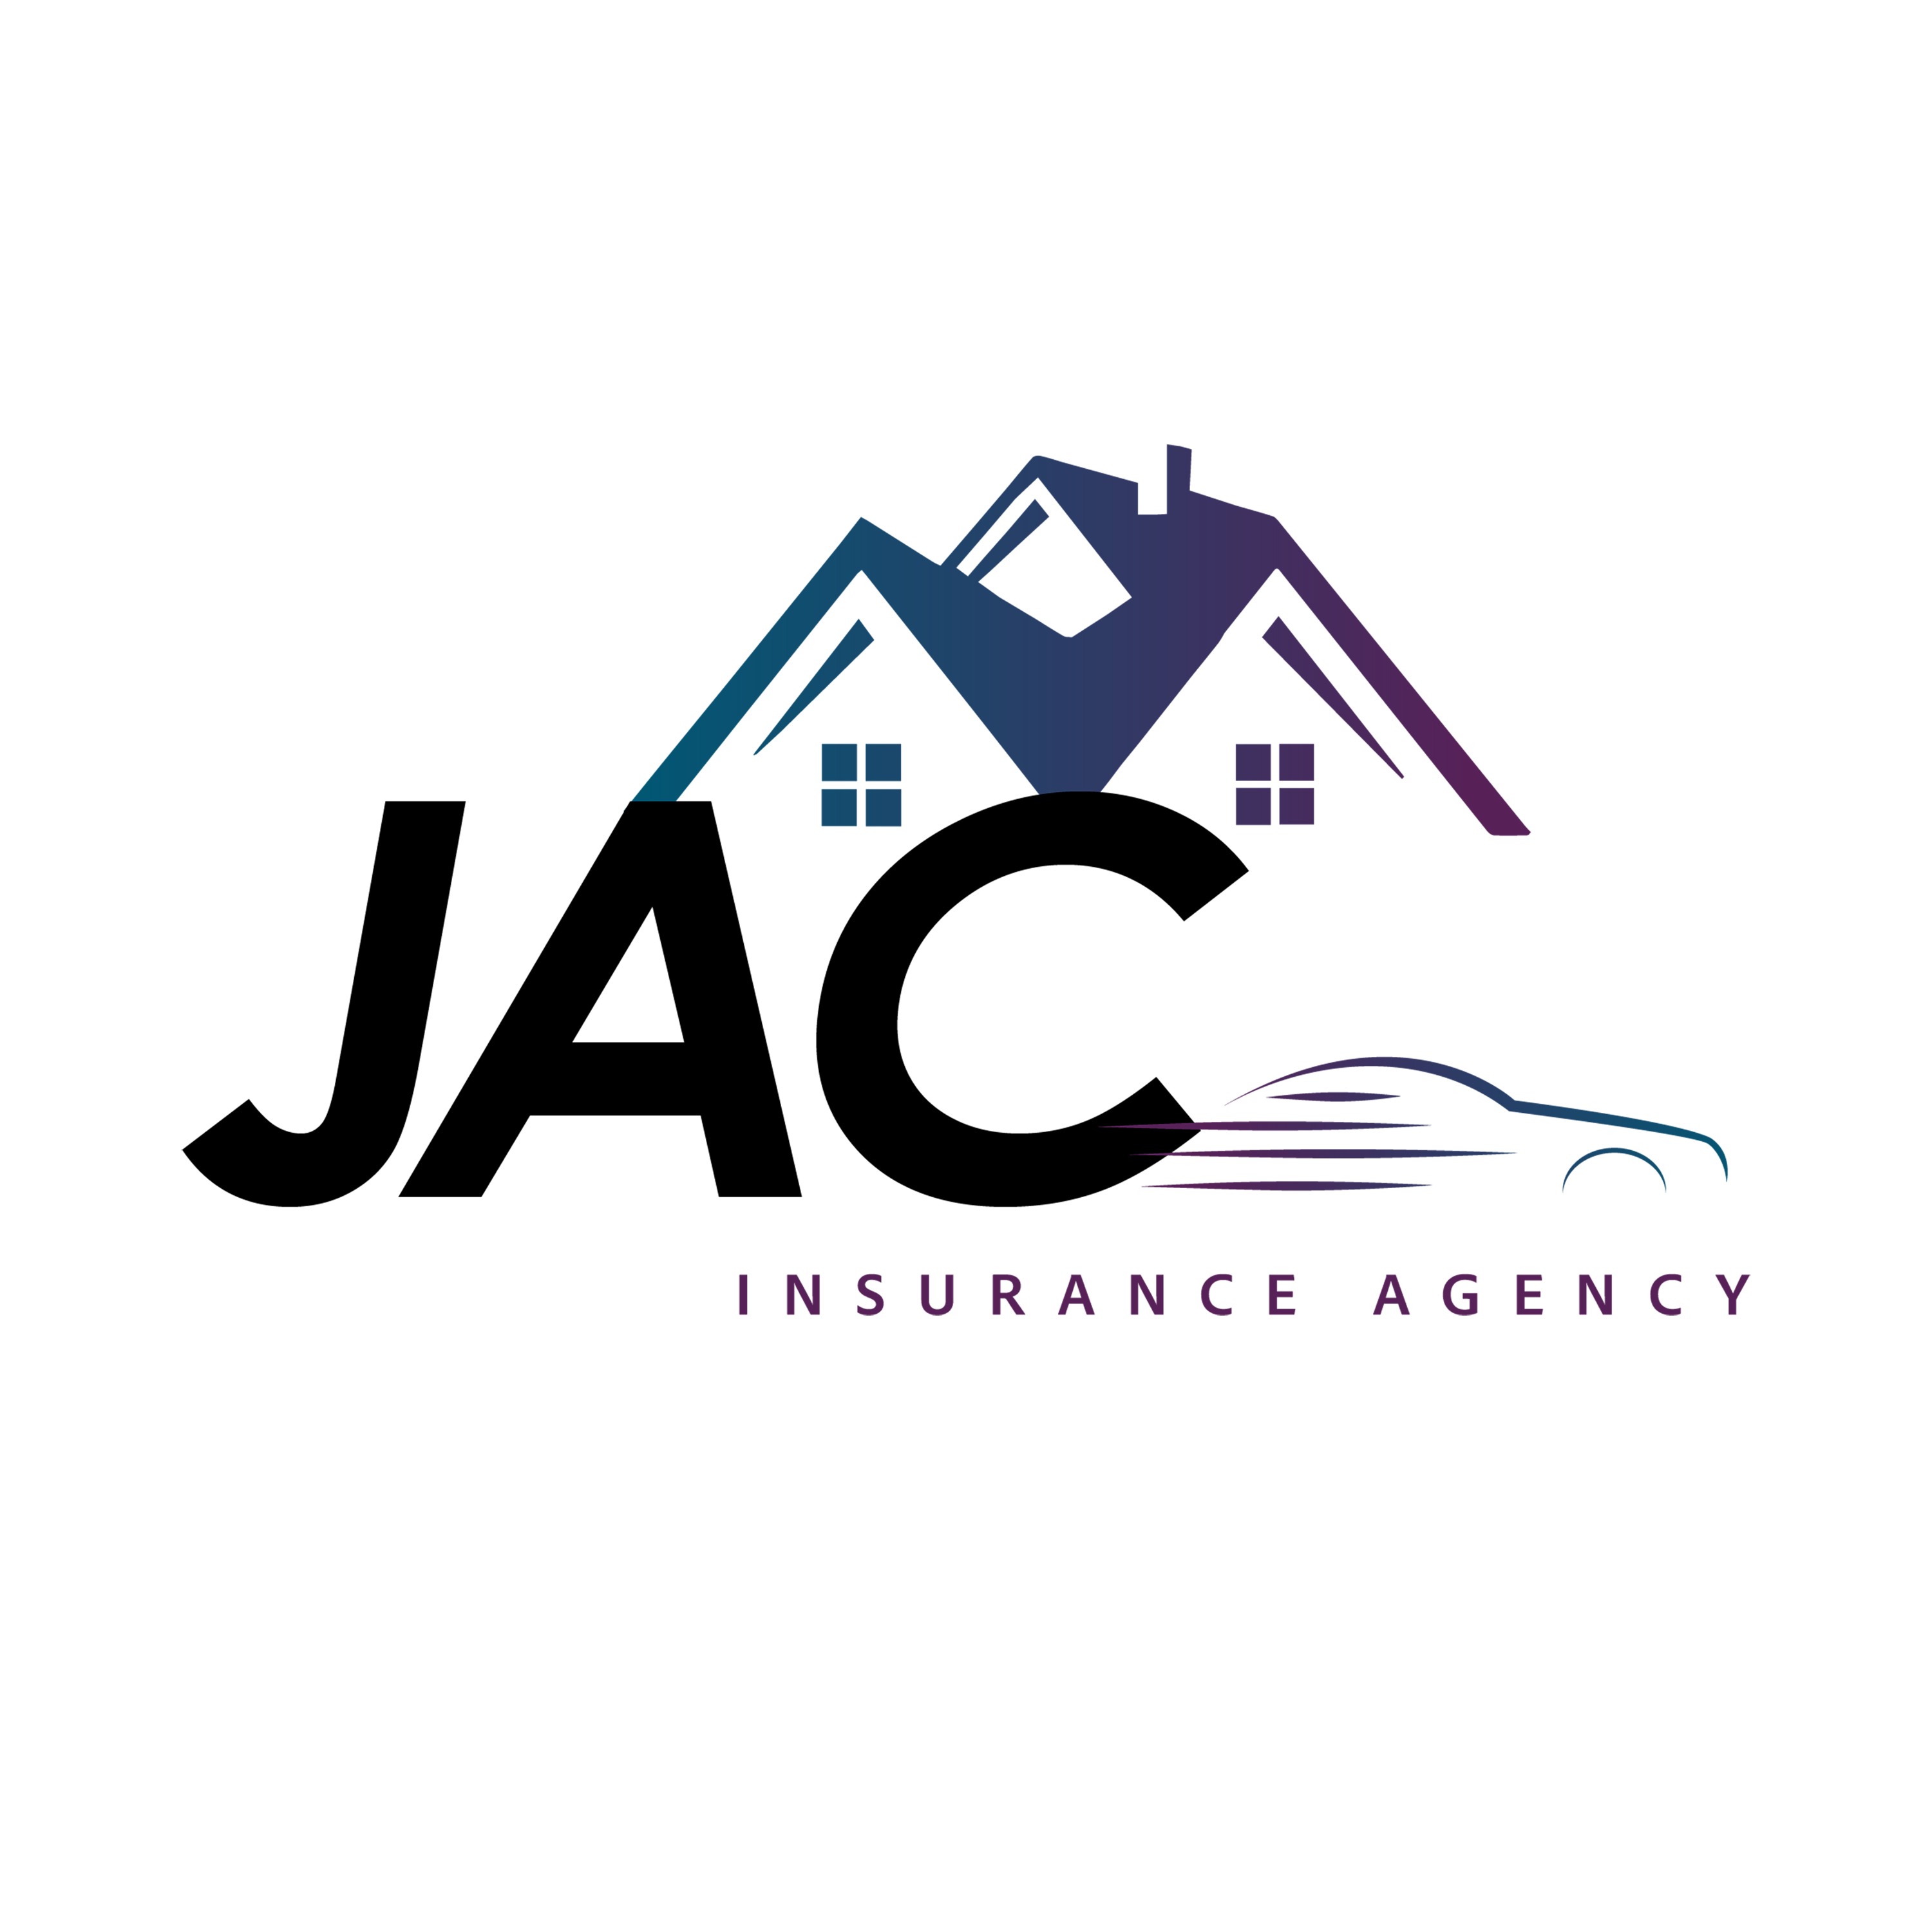 JAC Insurance agency logo with house and fast car